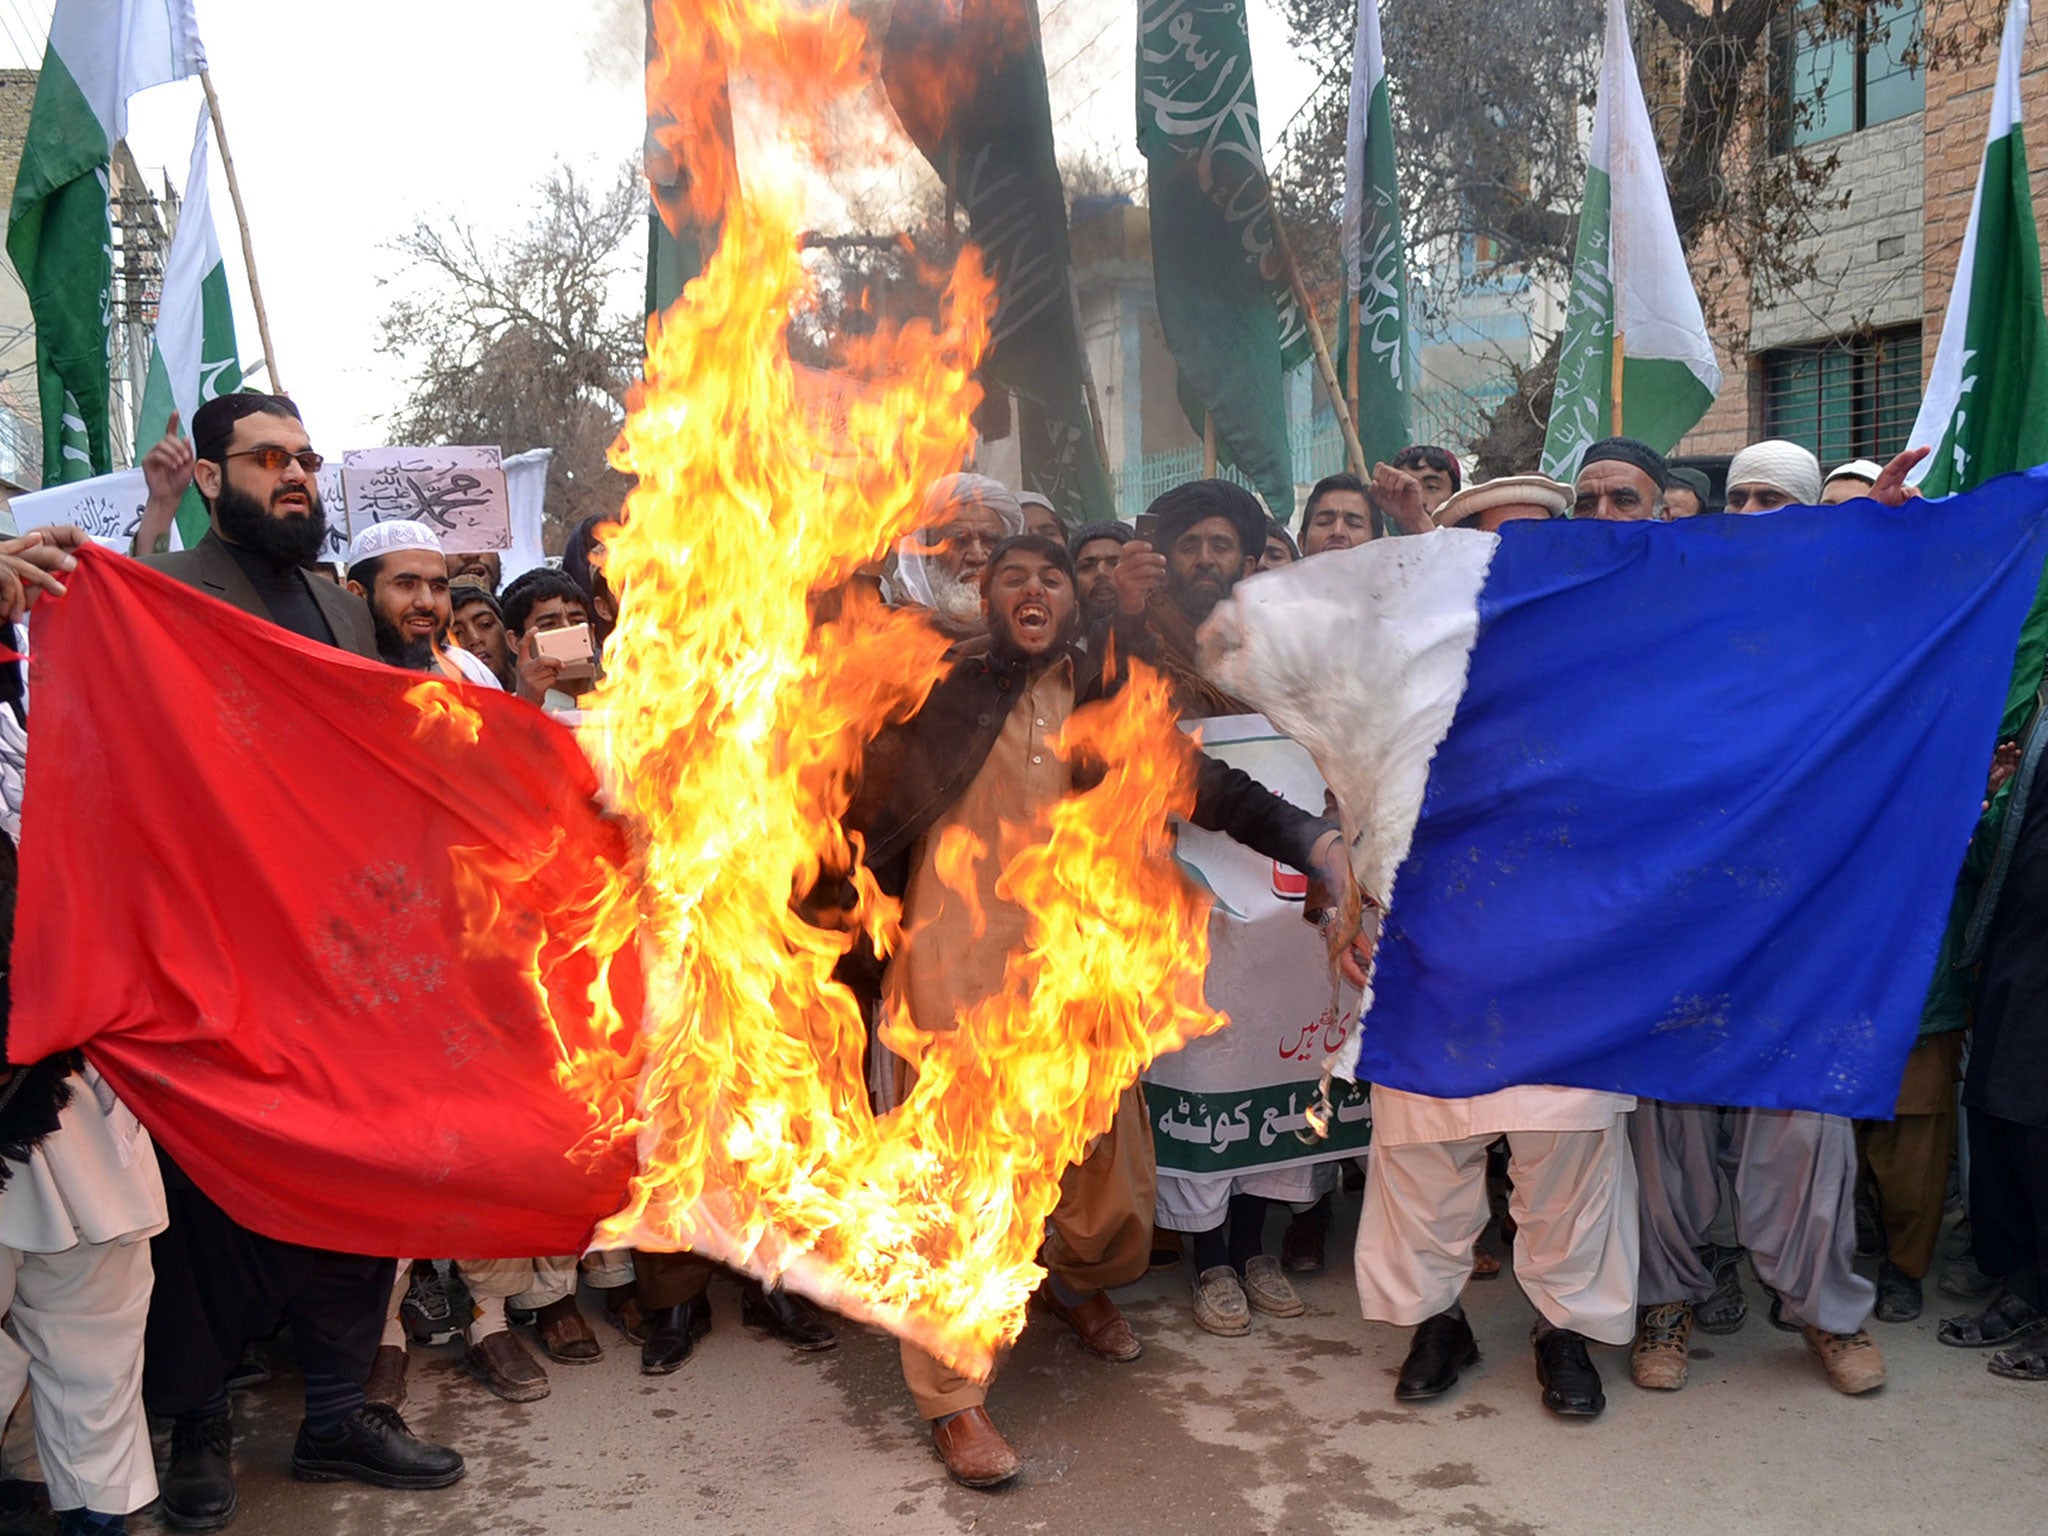 Pakistani Islamists burn a French flag during a protest against the printing of satirical sketches of the Prophet Mohammad by French magazine Charlie Hebdo in Quetta, Pakistan